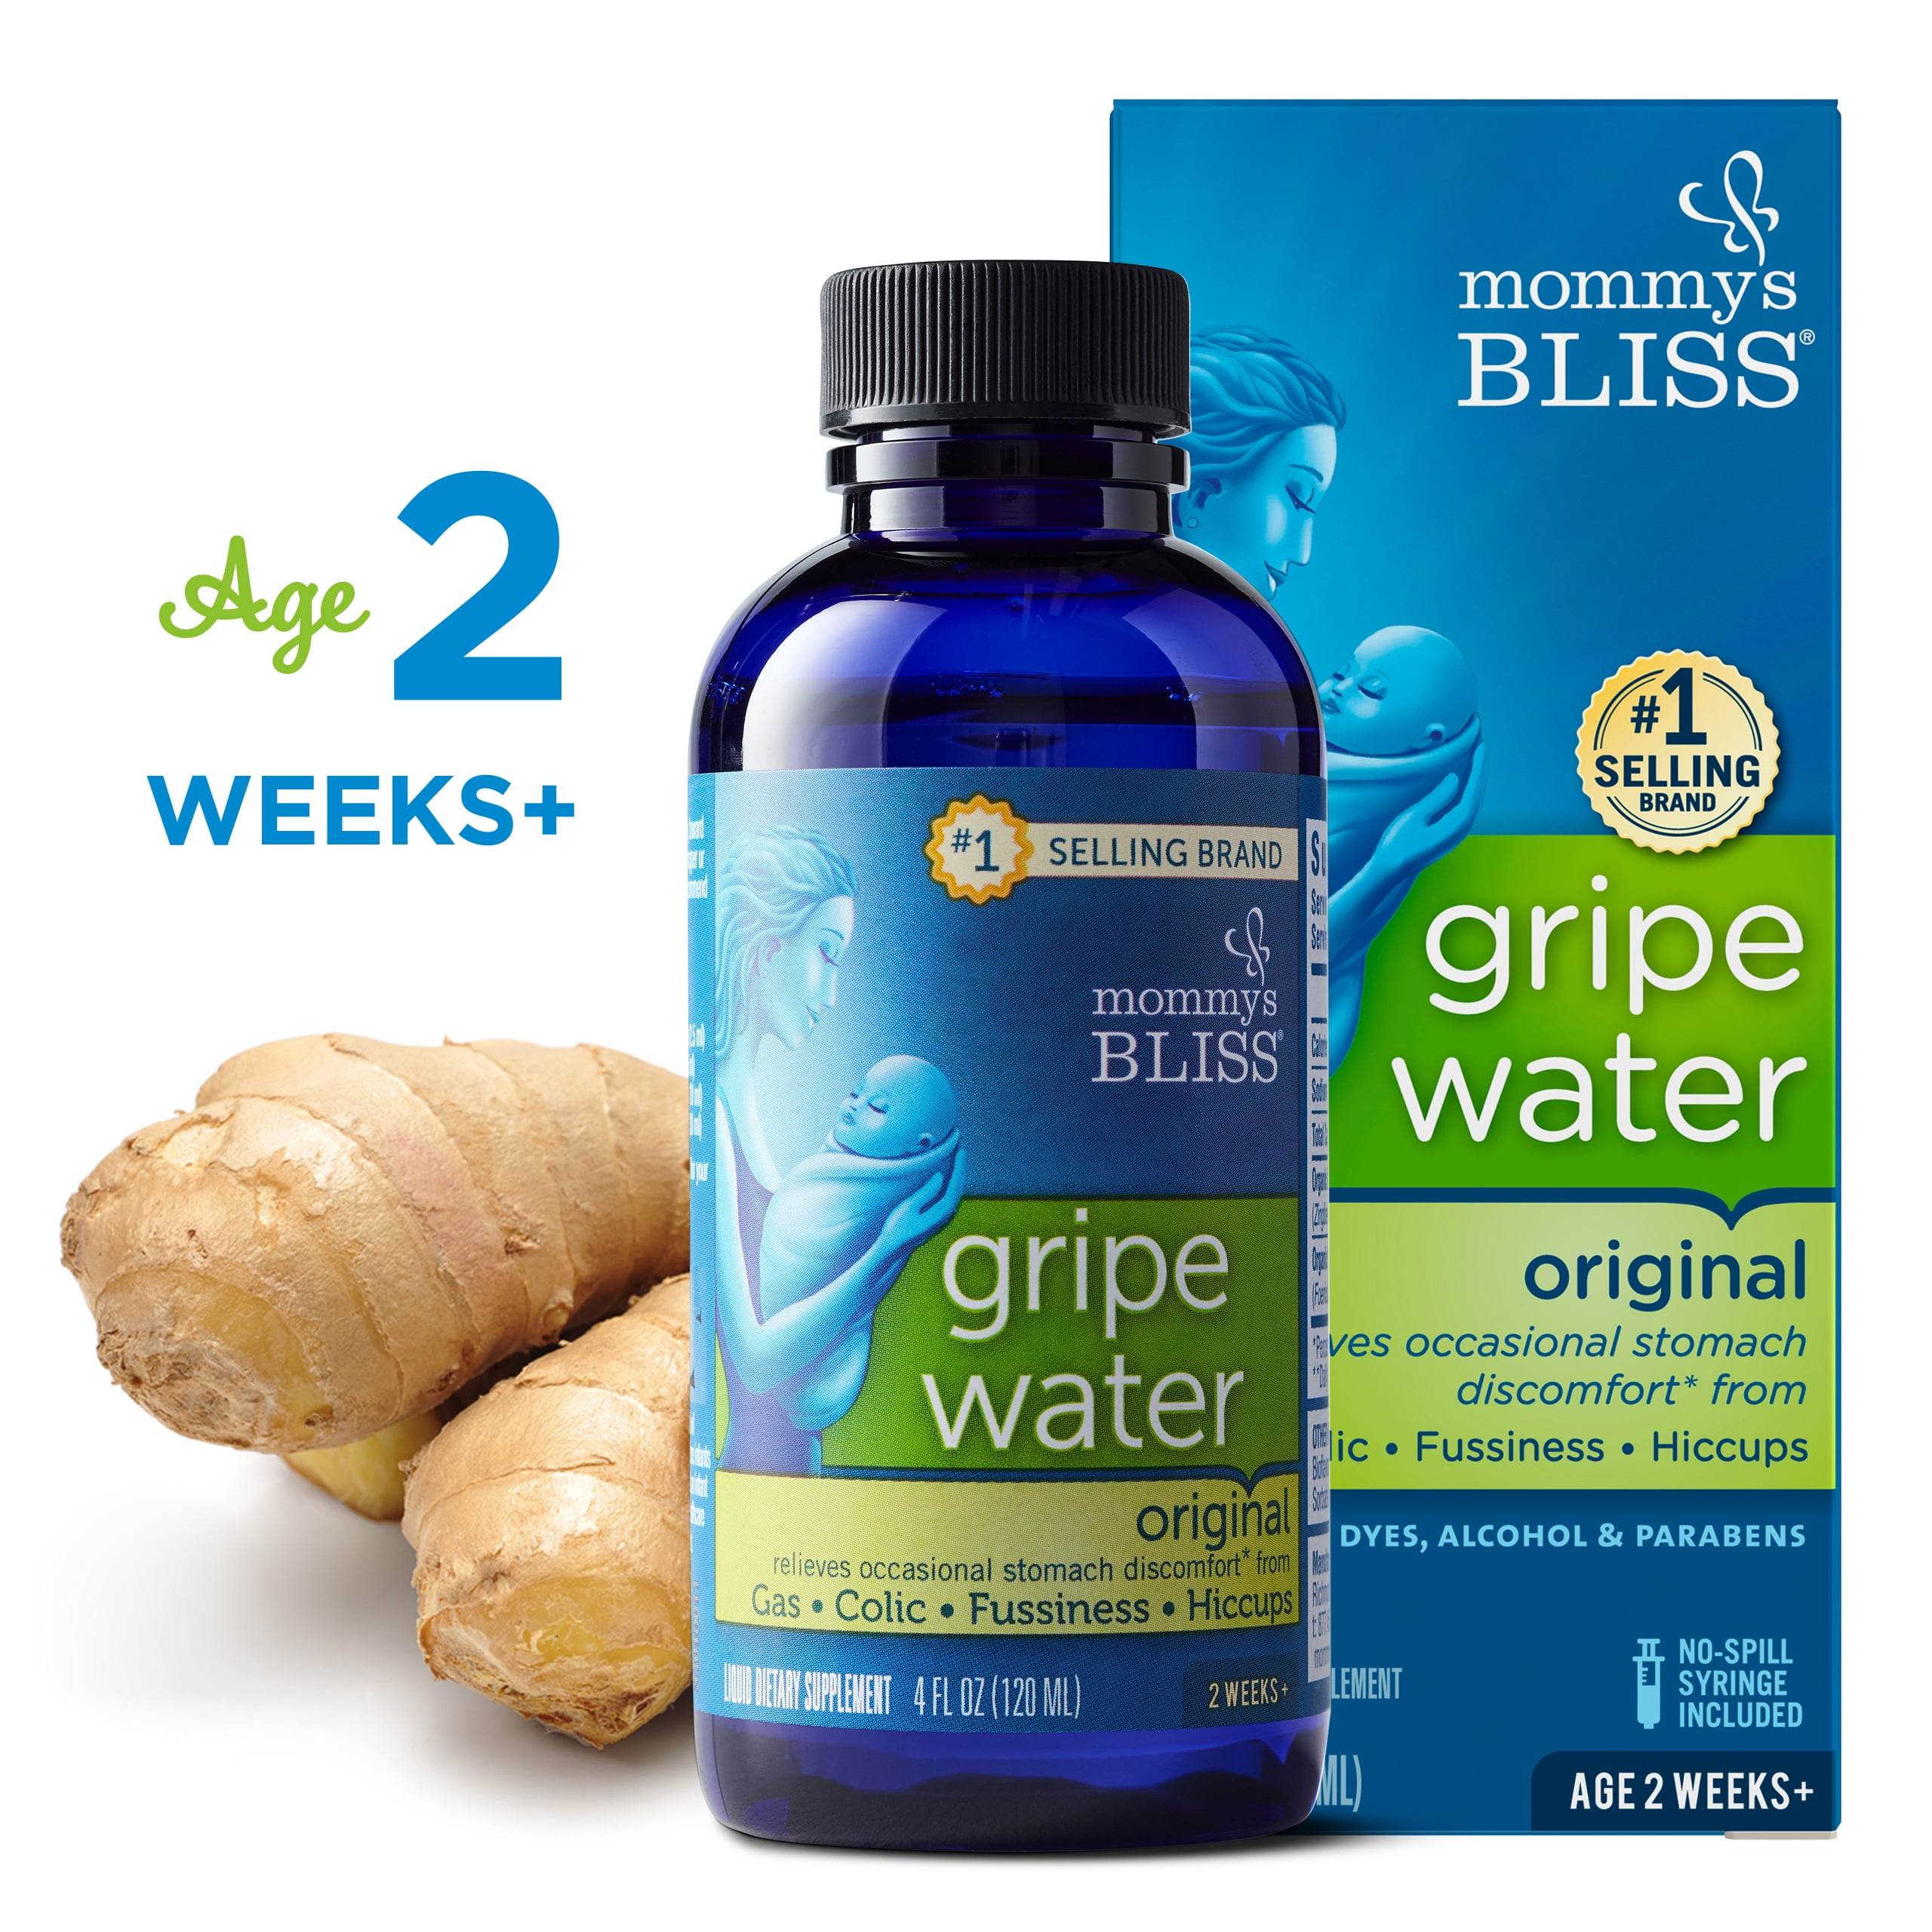 Gripe Water Day & Night Time Combo Pack – Mommy's Bliss